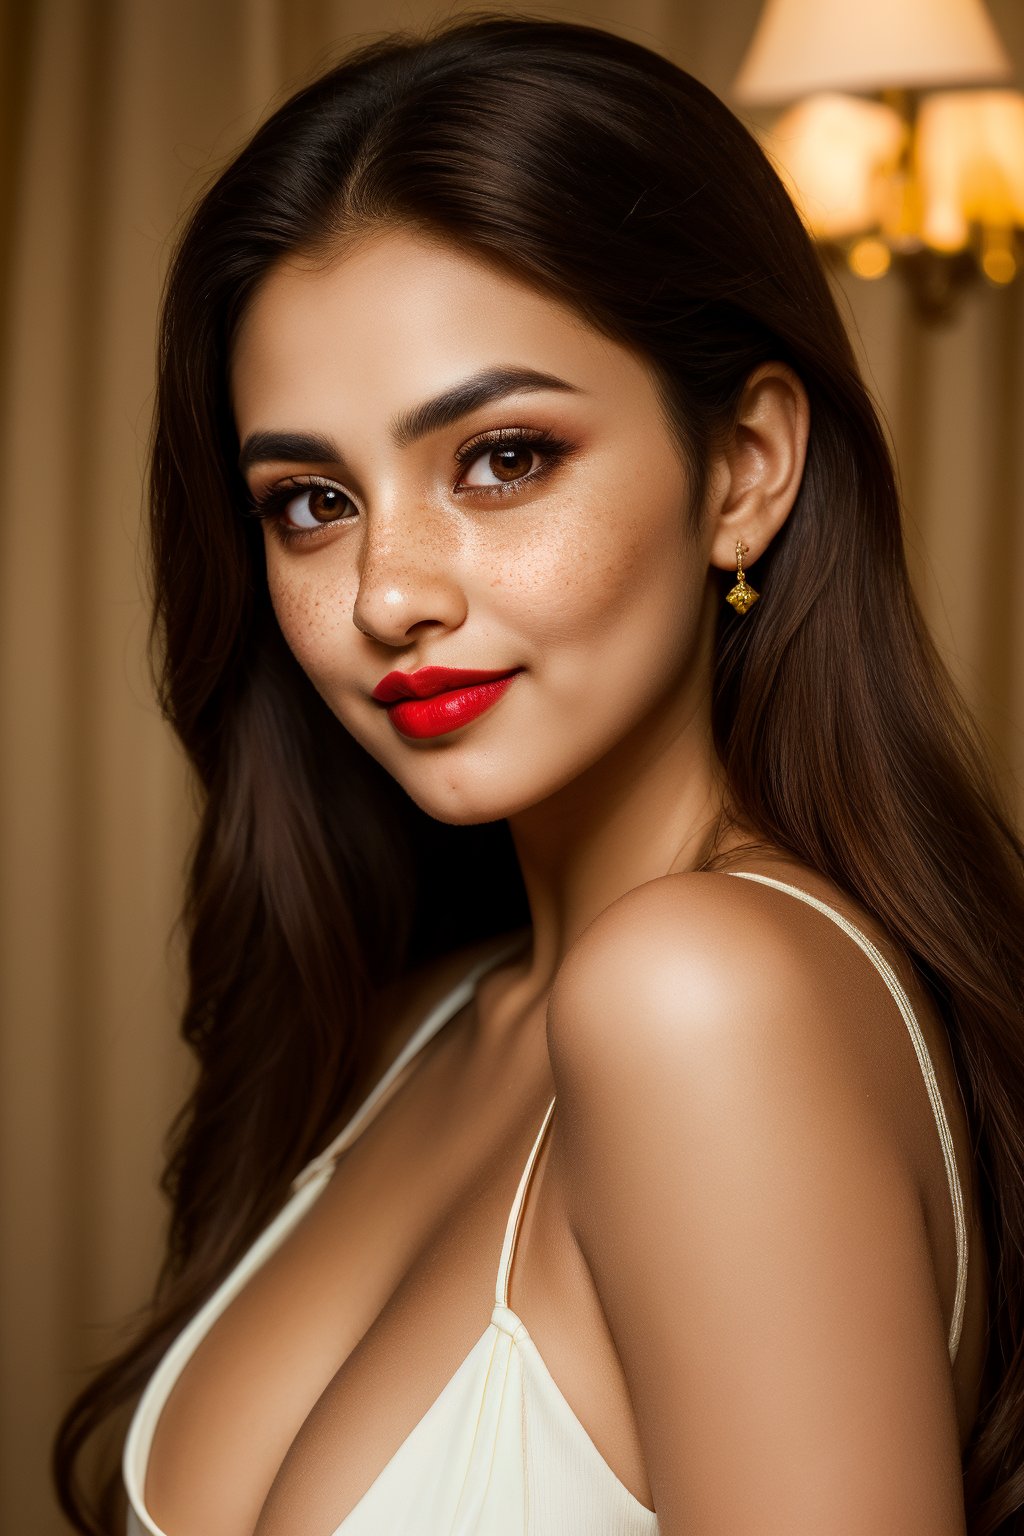 hyper-realistic 8k, young beautiful pakistani girl, detailed eyes, sensual eyes, brown colored eyes, light freckles on face, red nose, dimples on the cheek, sexy lips, parted lips, dark red lipstick, long hair, short dress, smirk, pakistani origin girl, cute face, perfect face symmetry